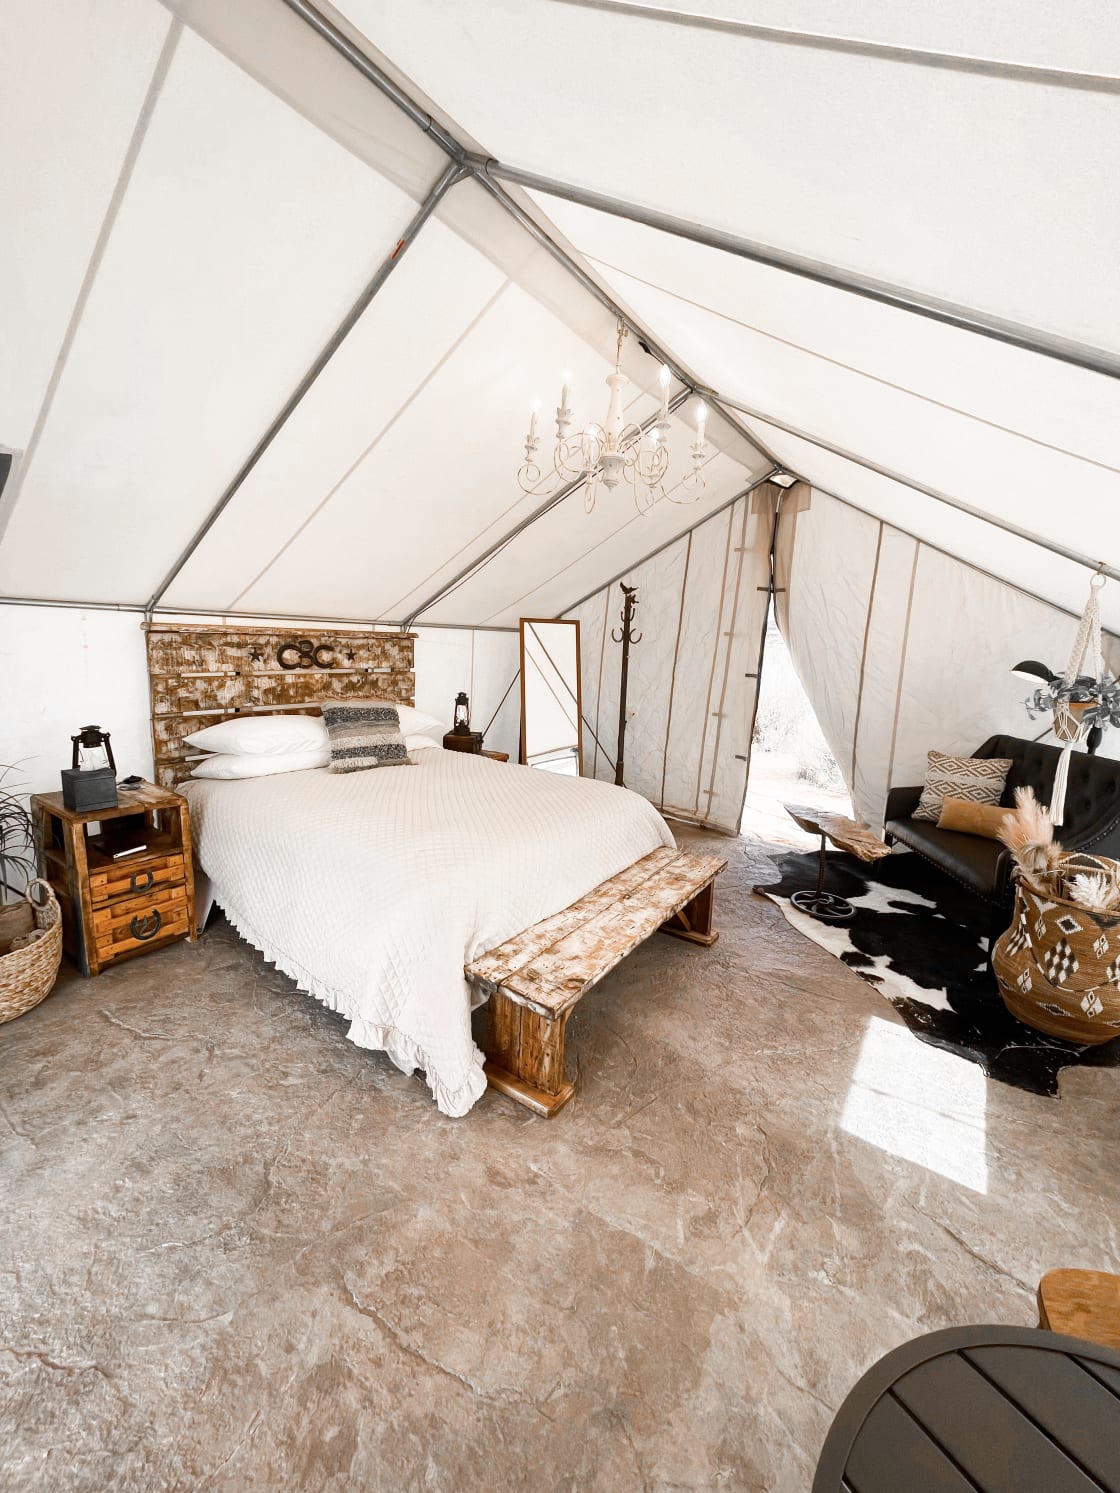 Welcome to your desert escape, Honeymoon Hideout. Handcrafted Western decor mixed with modern touches, there's no other tent like it. A/C and Heater provided.